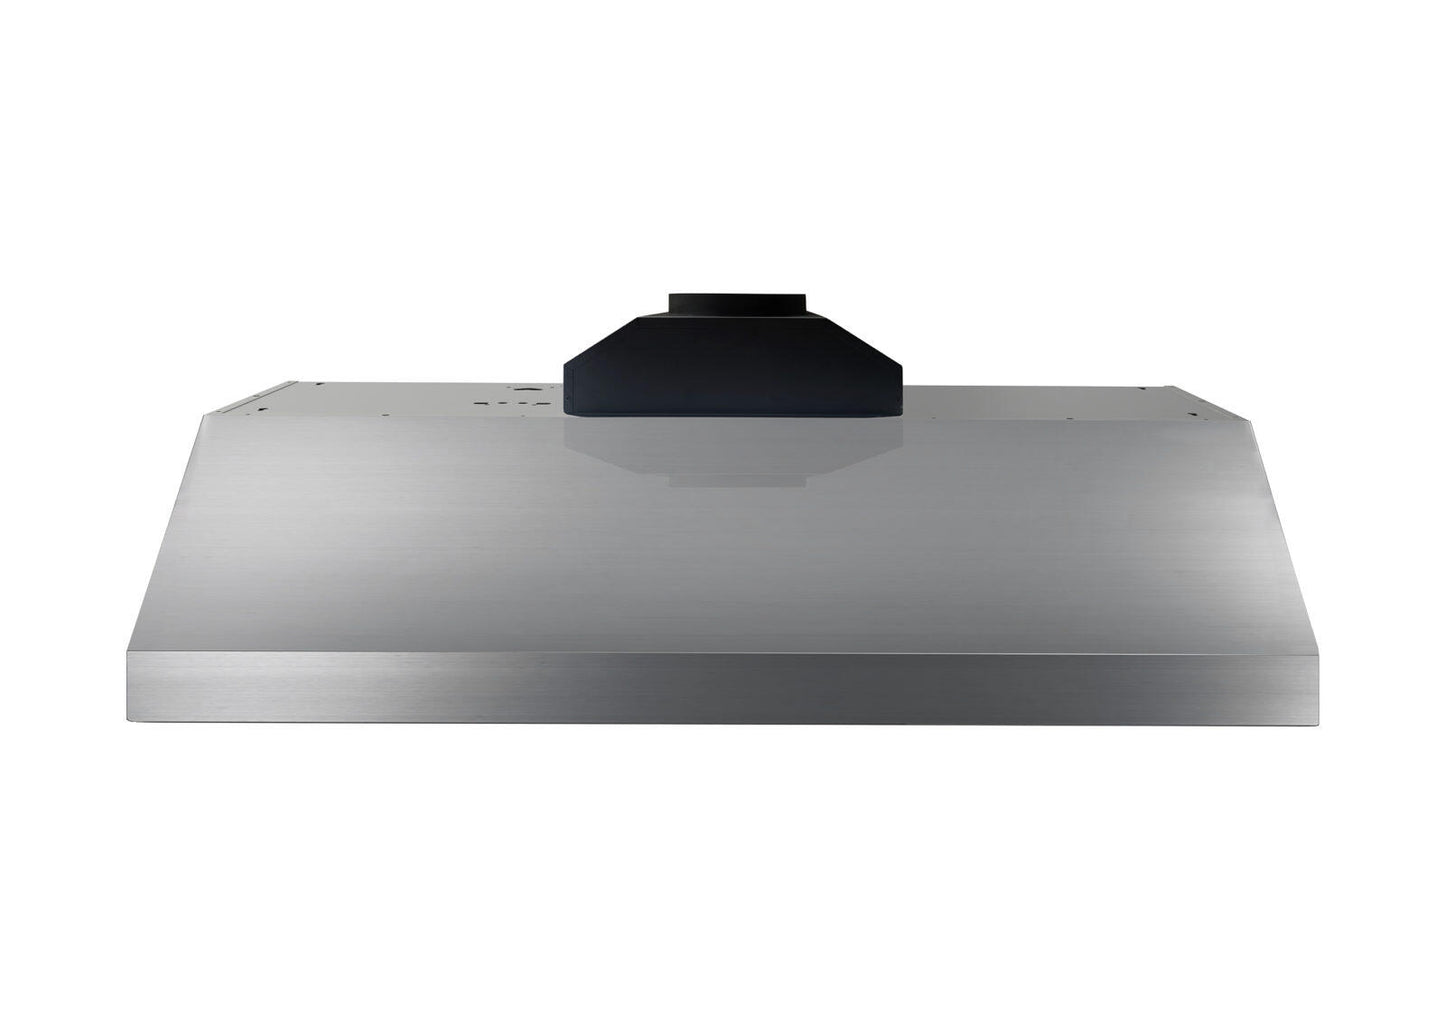 Thor Kitchen TRH4806 48 Inch Professional Range Hood, 11 Inches Tall In Stainless Steel